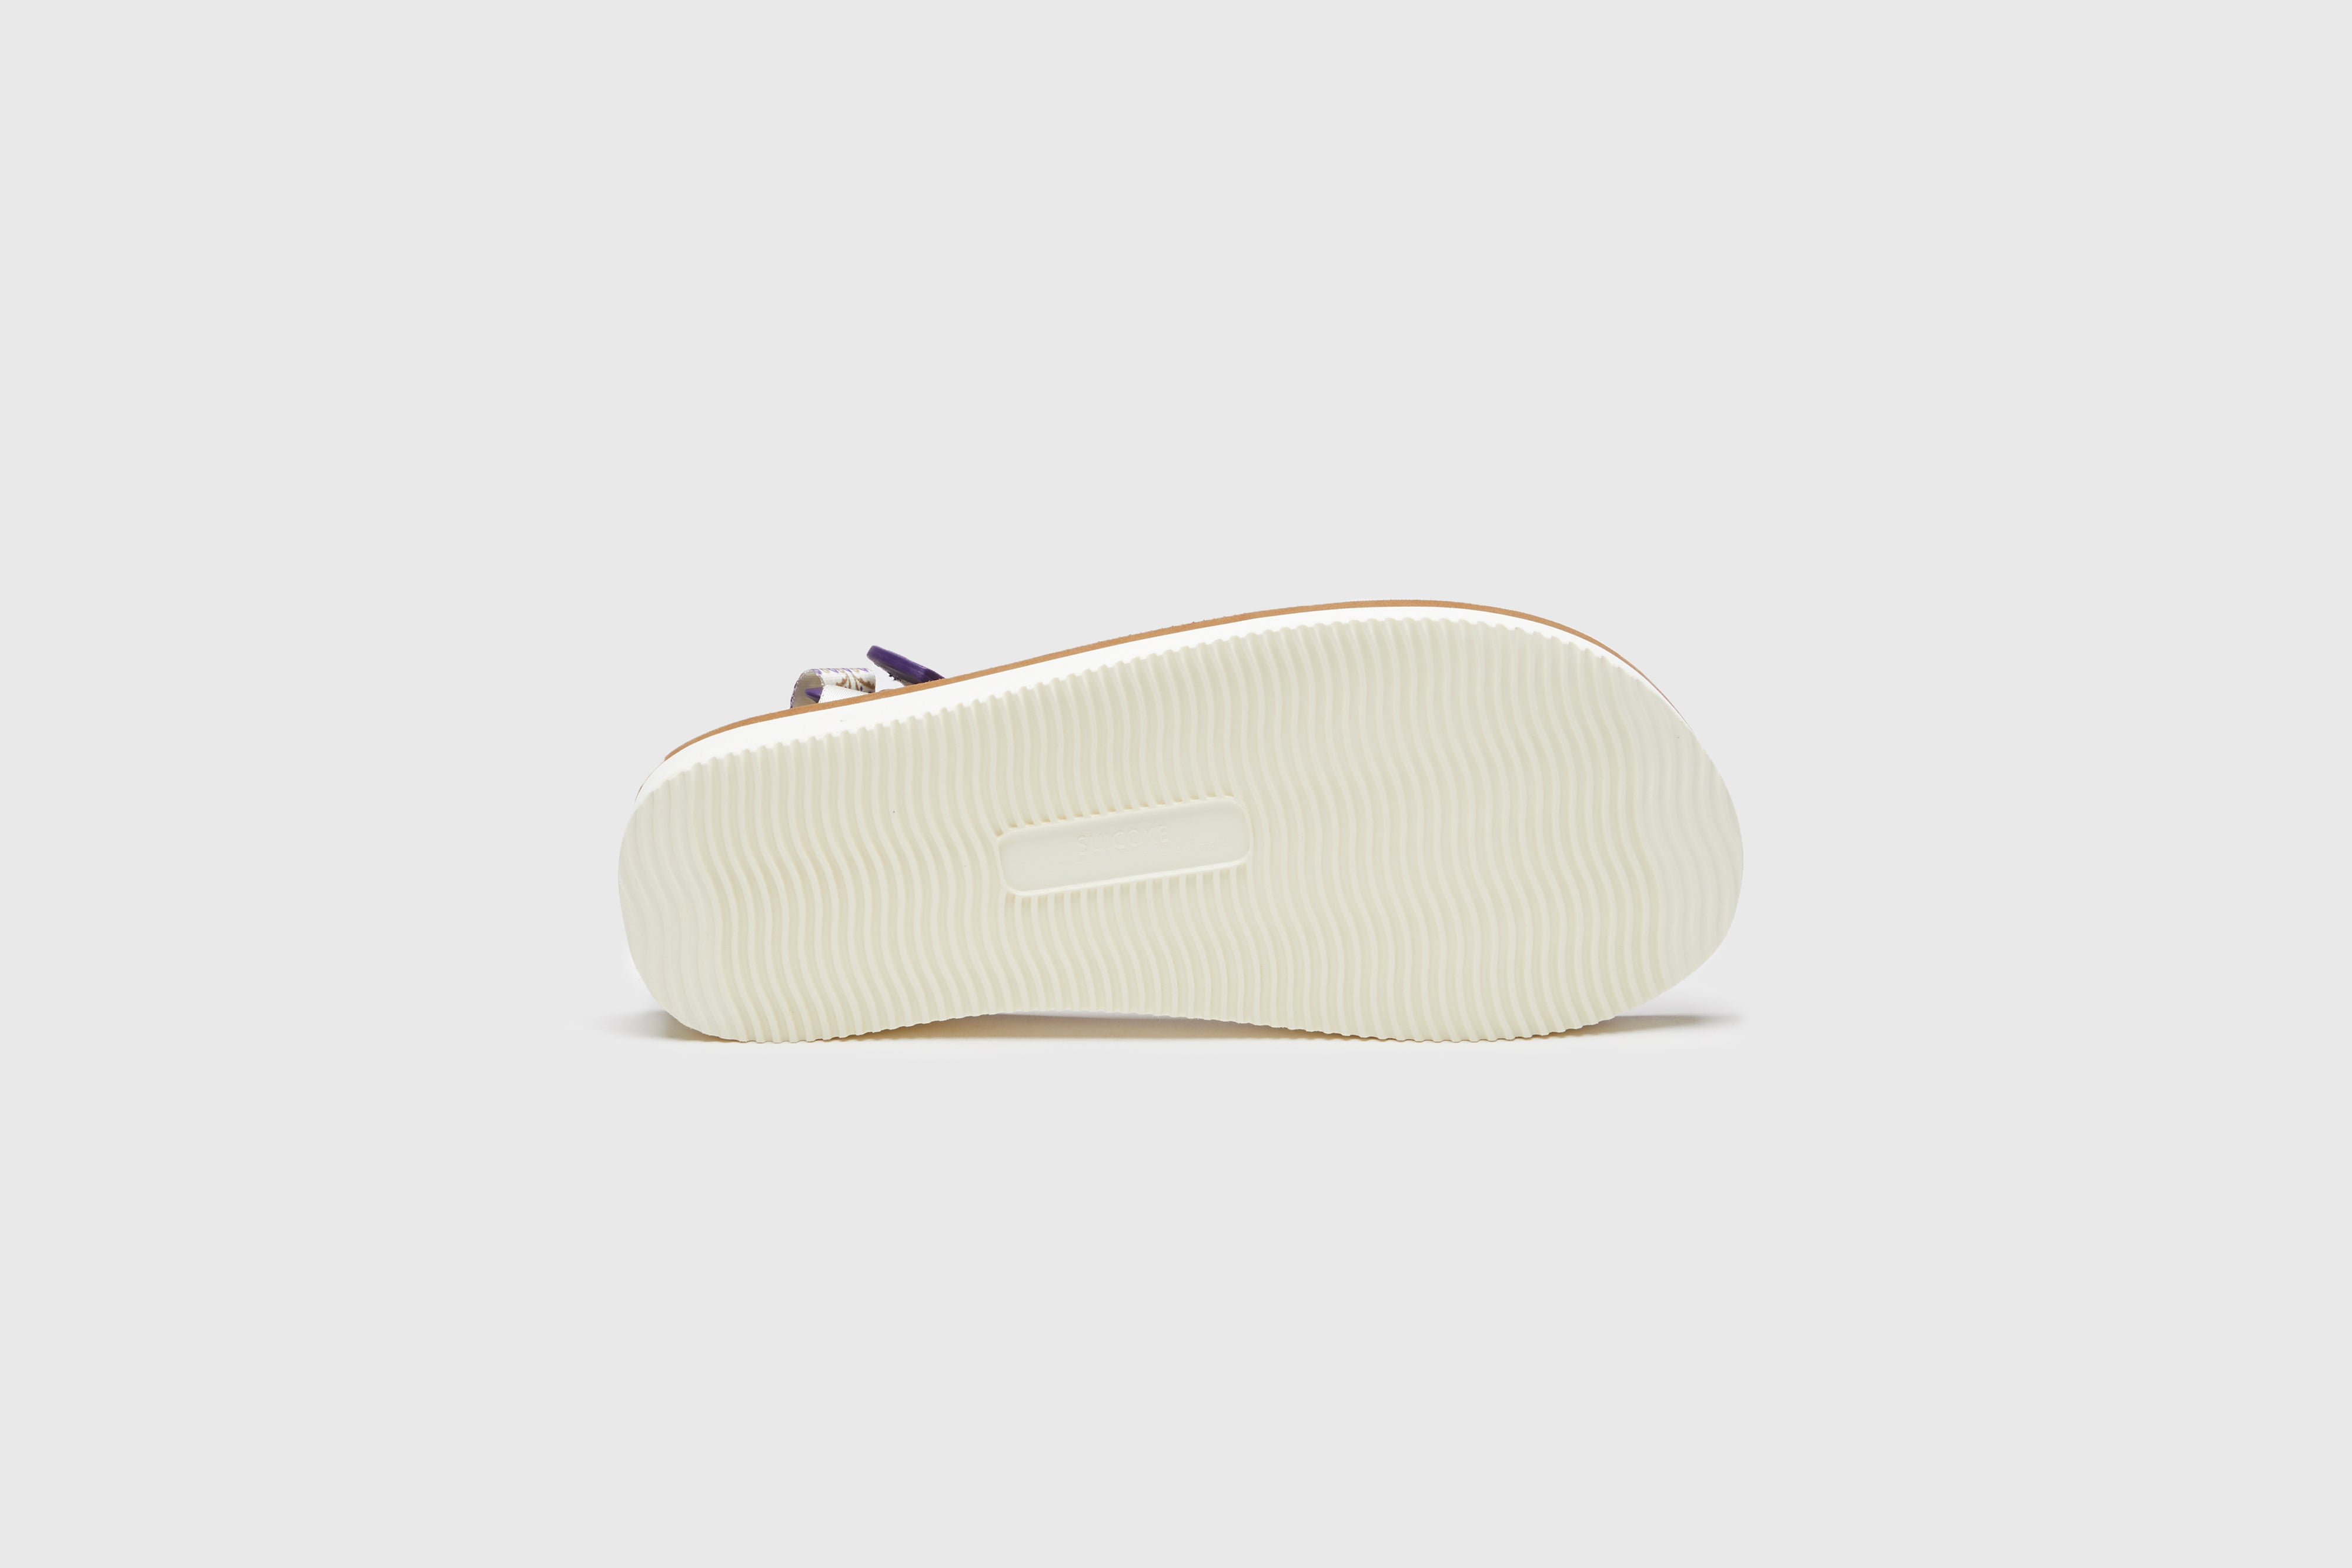 SUICOKE CEL-PO sandals with ivory &amp; brown nylon upper, ivory &amp; brown midsole and sole, strap and logo patch. From Spring/Summer 2023 collection on eightywingold Web Store, an official partner of SUICOKE. OG-022PO IVORY X BROWN